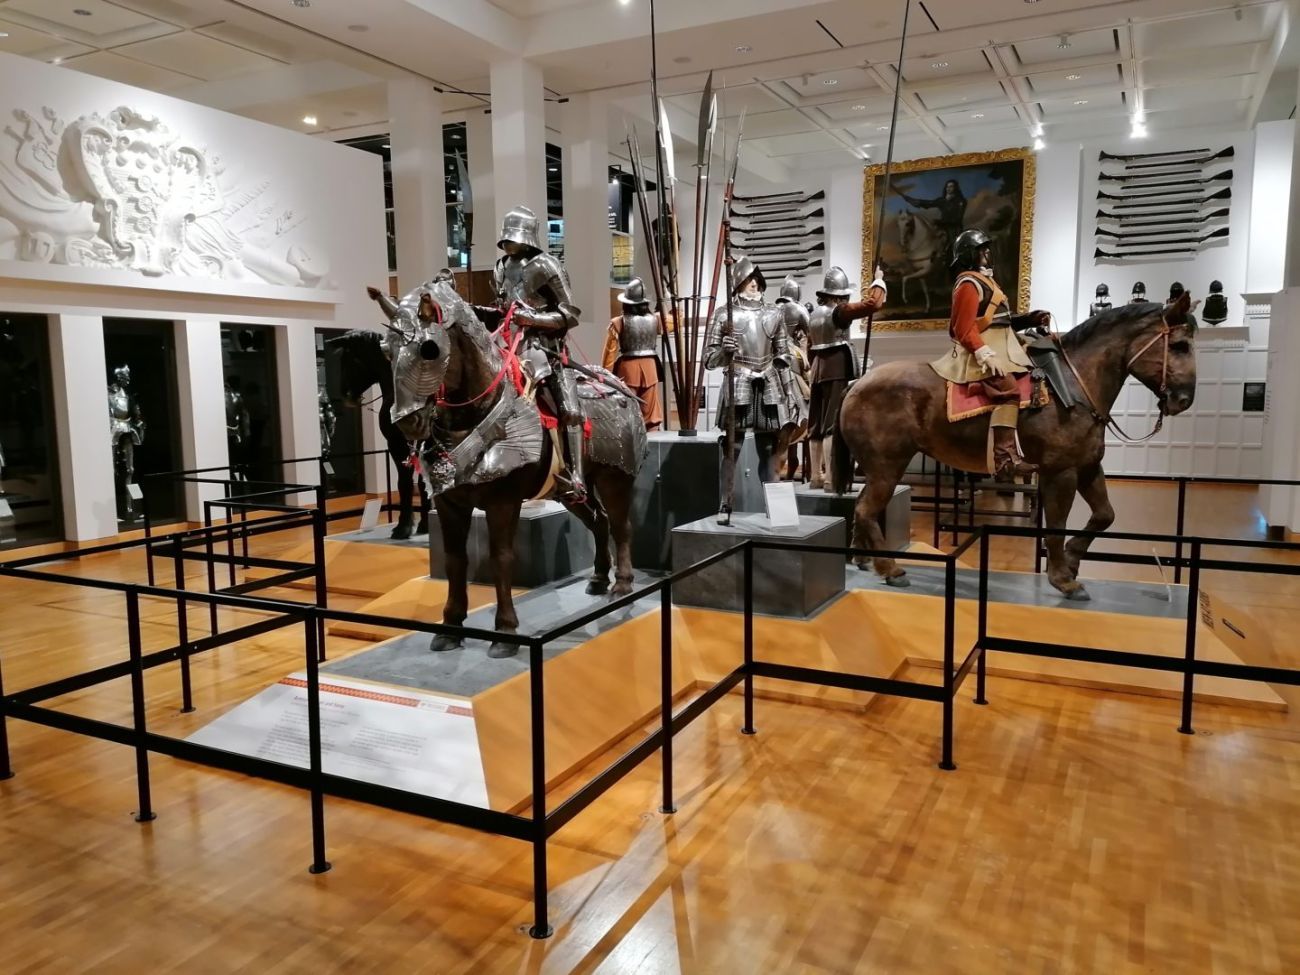 Horses with armour and men wearing armour in a museum gallery